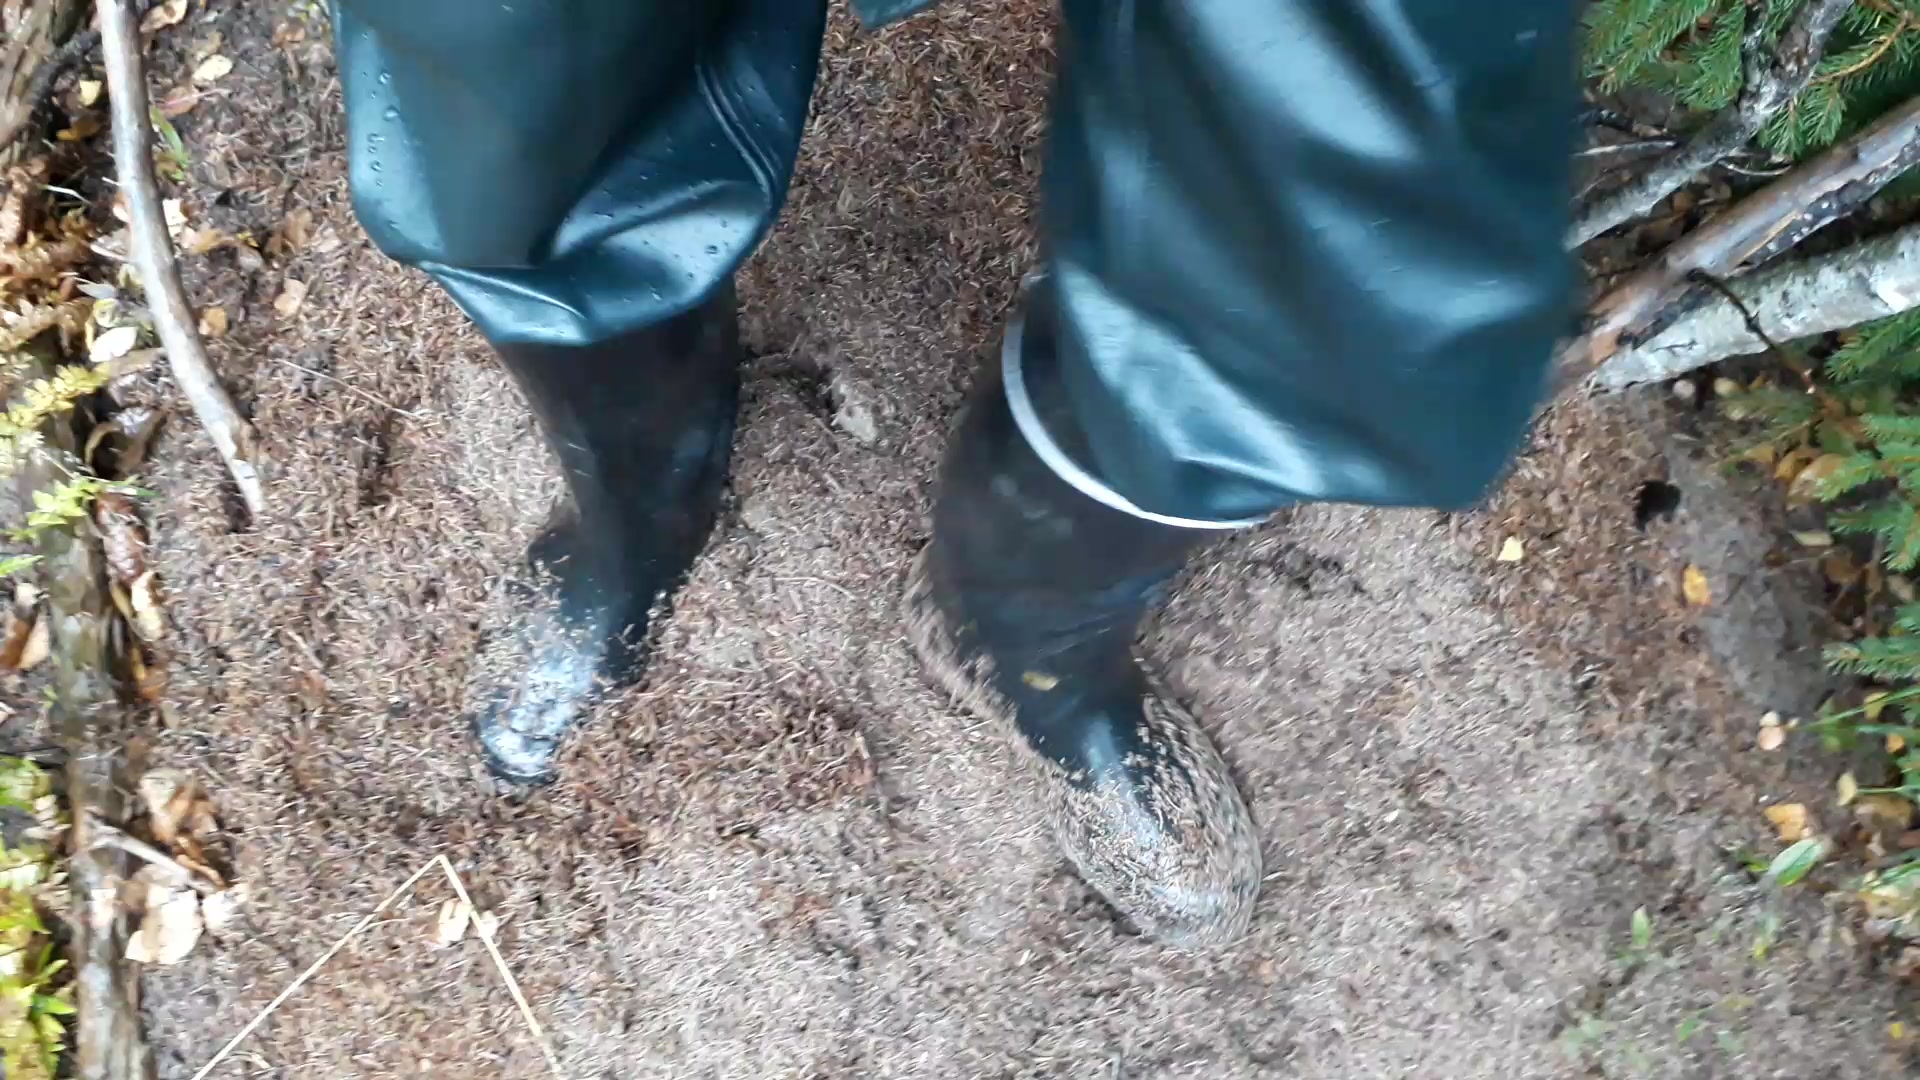 Rubber boots vs ant hill